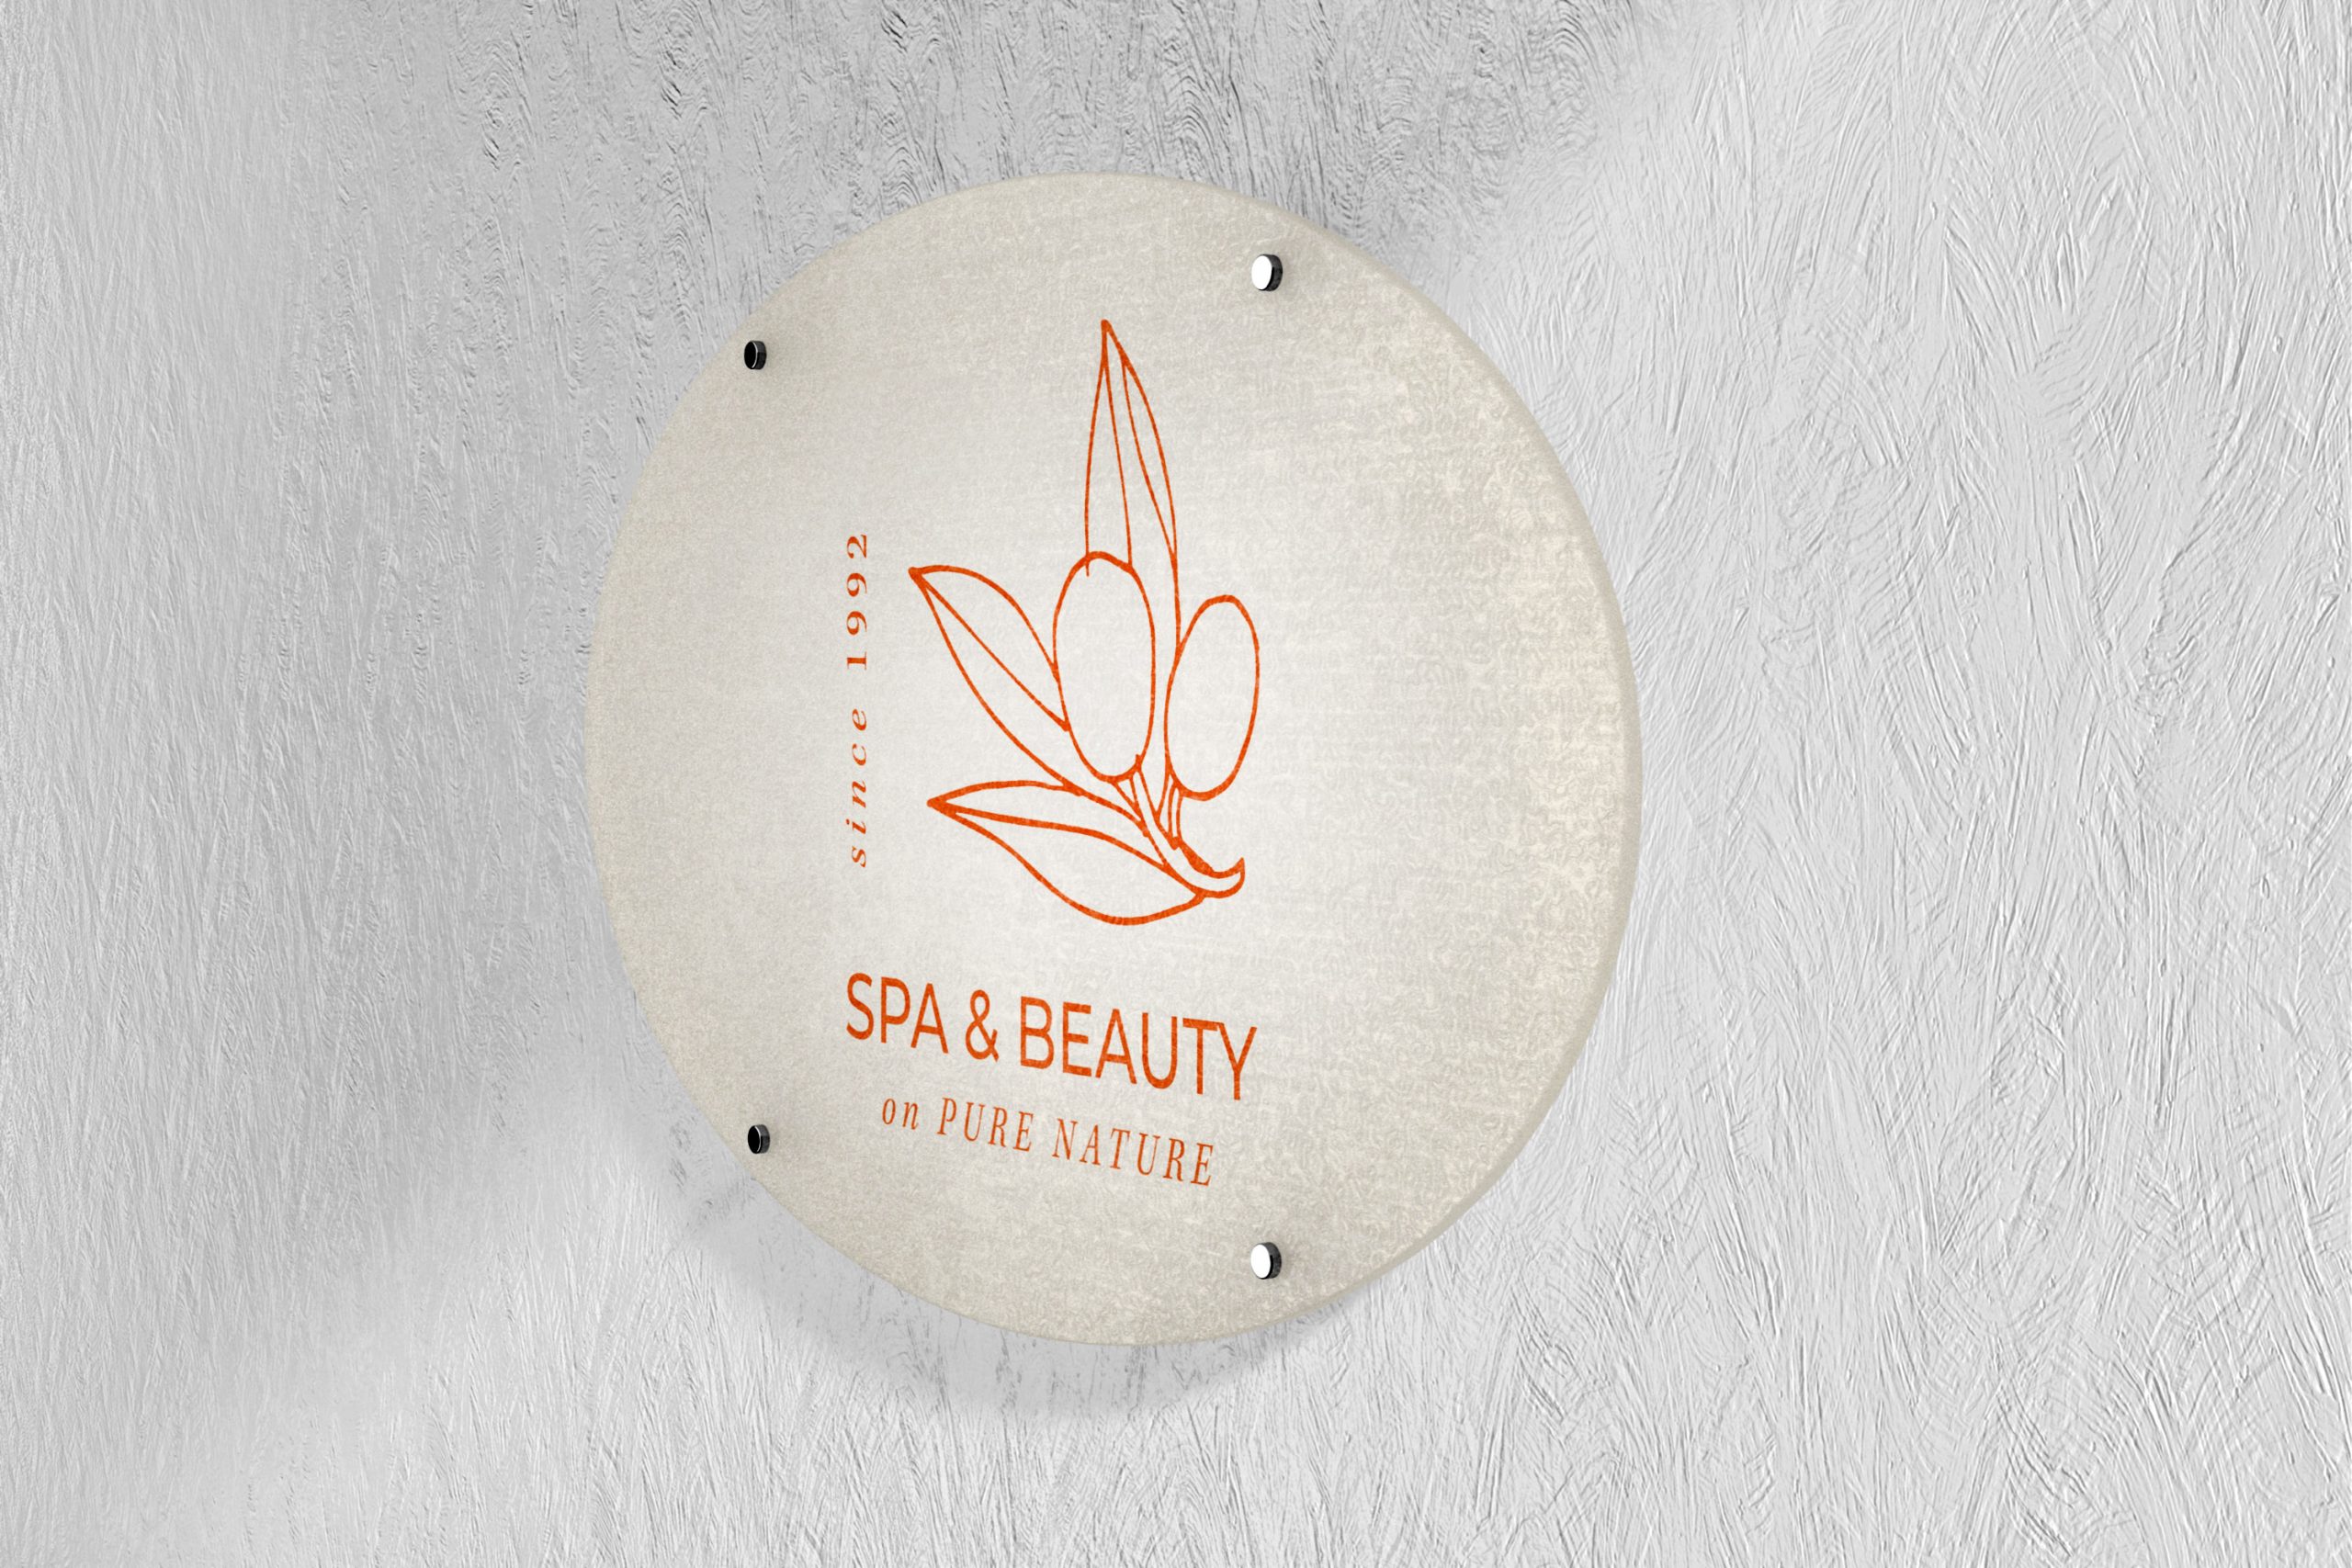 Custom Acrylic Signage for Spa & Beauty in Wilmington